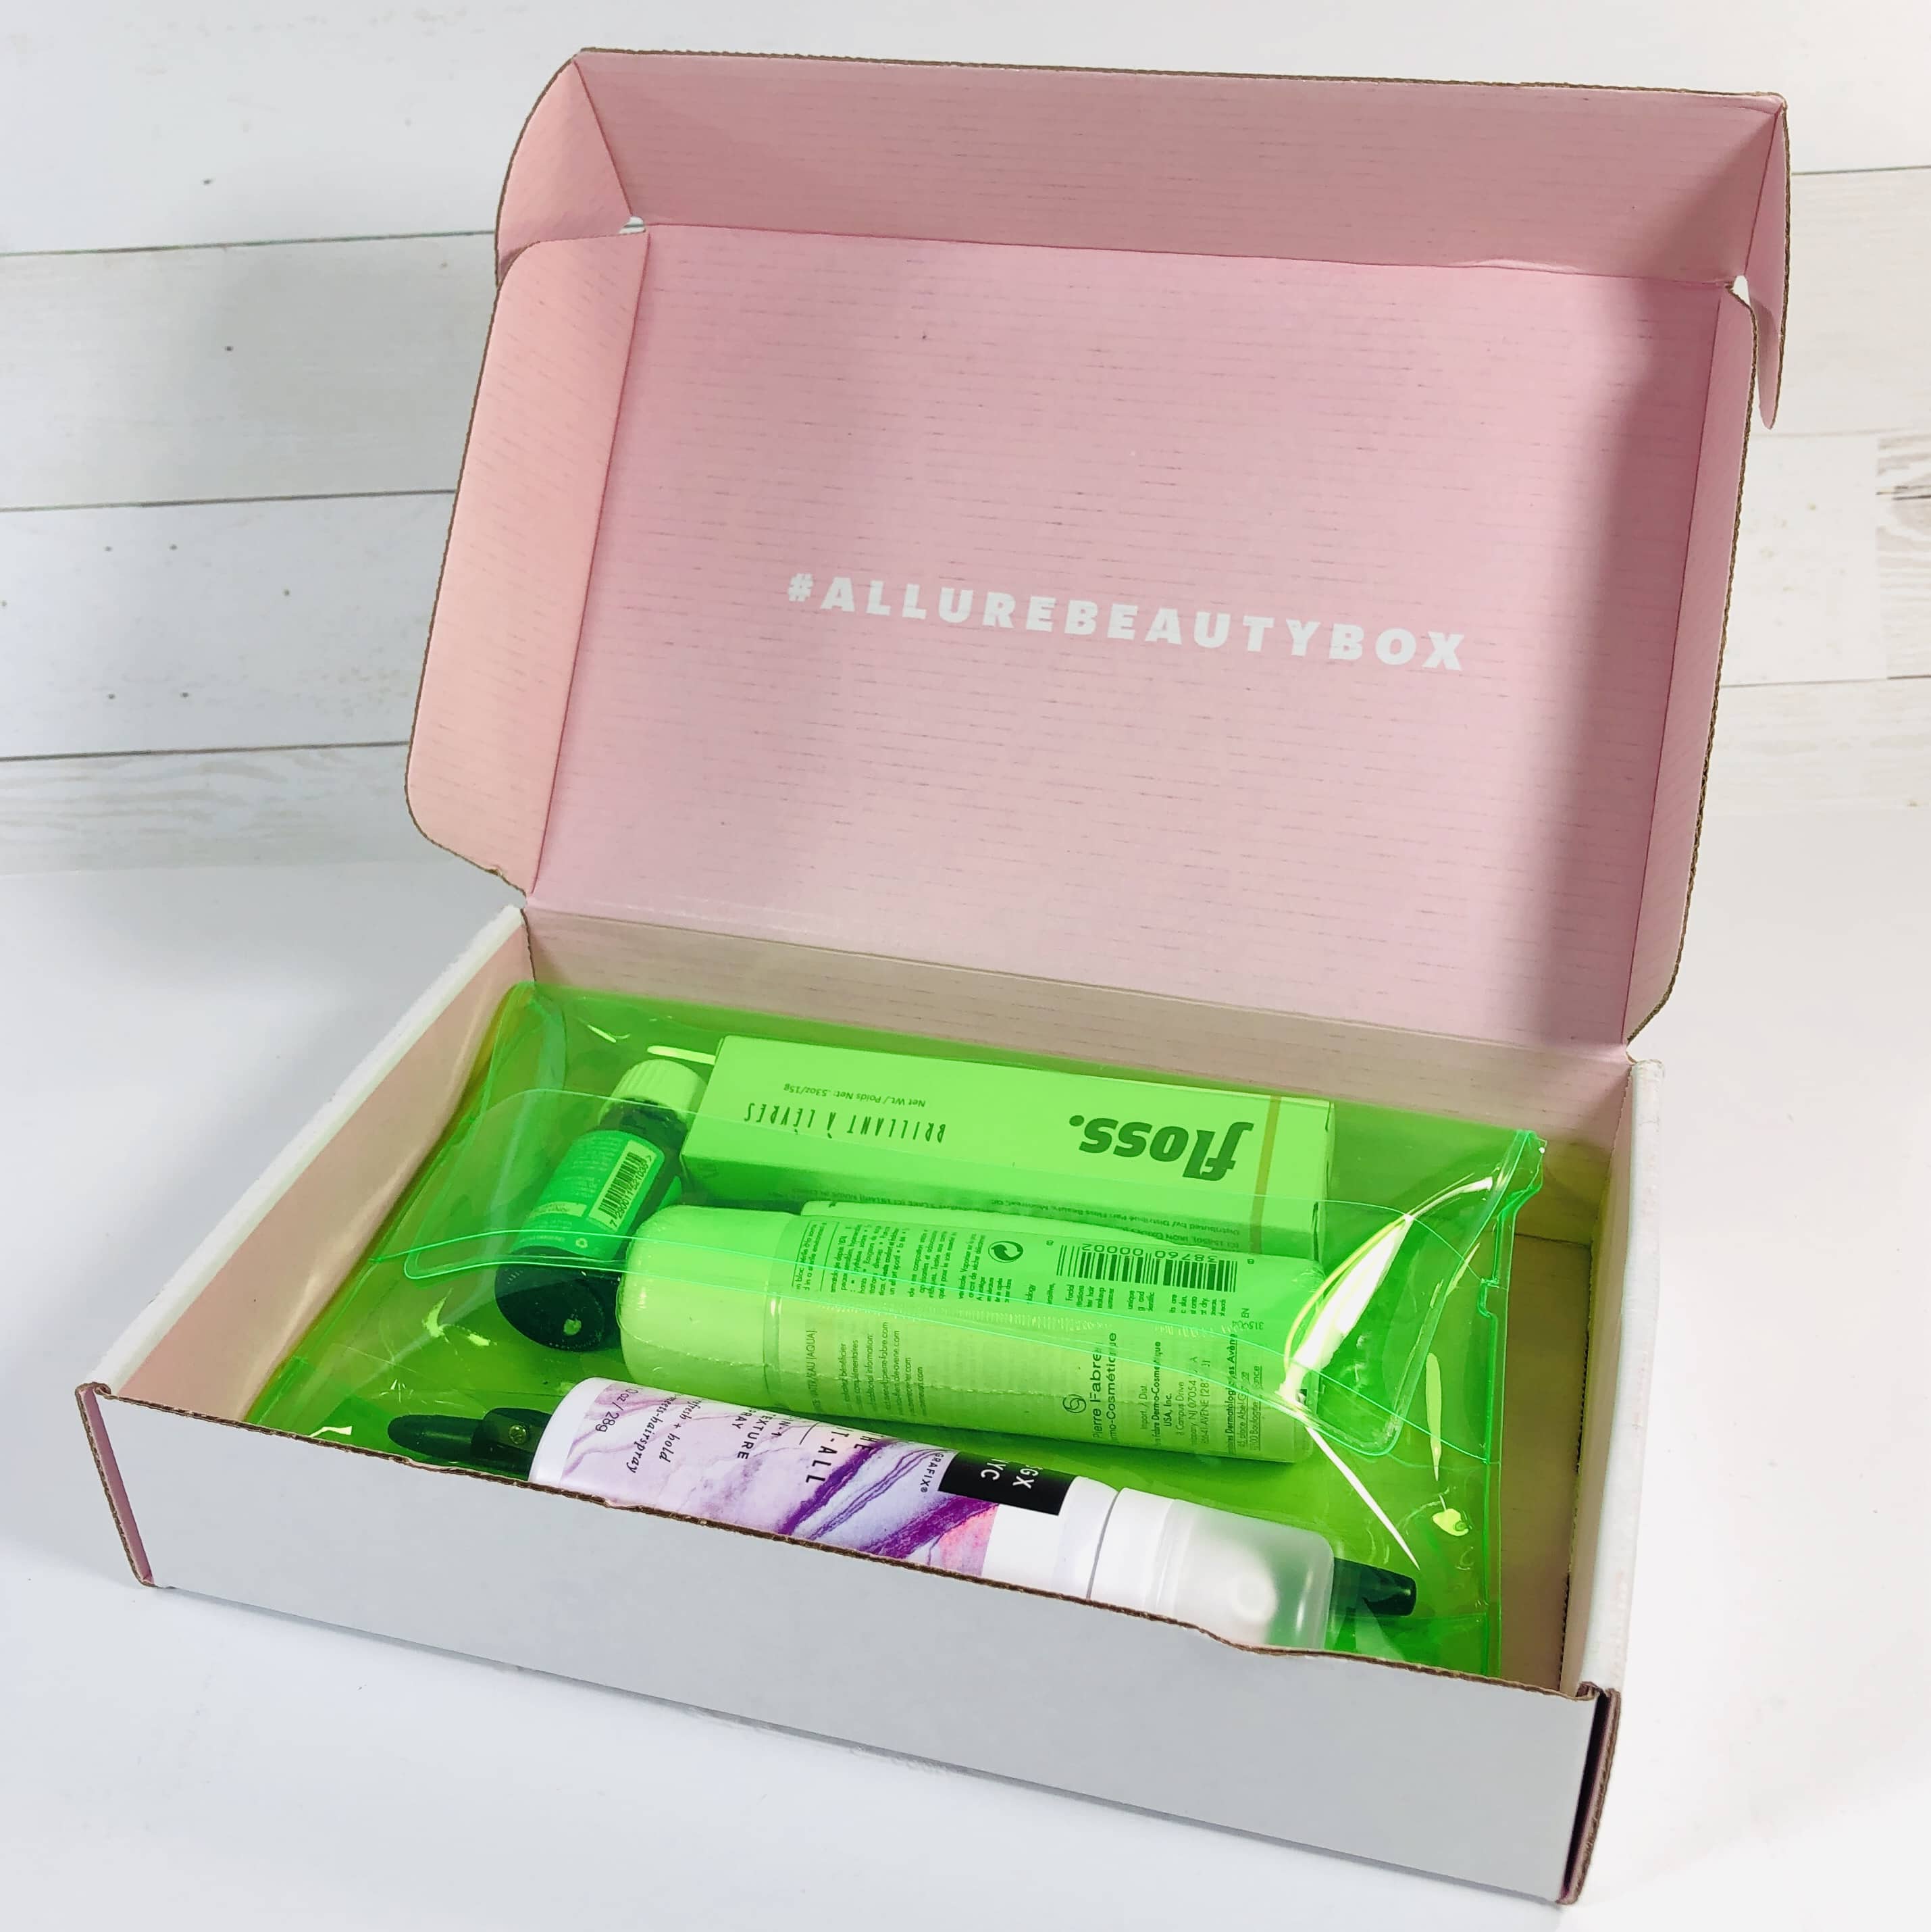 Allure Beauty Box June 2019 Subscription Box Review & Coupon Hello